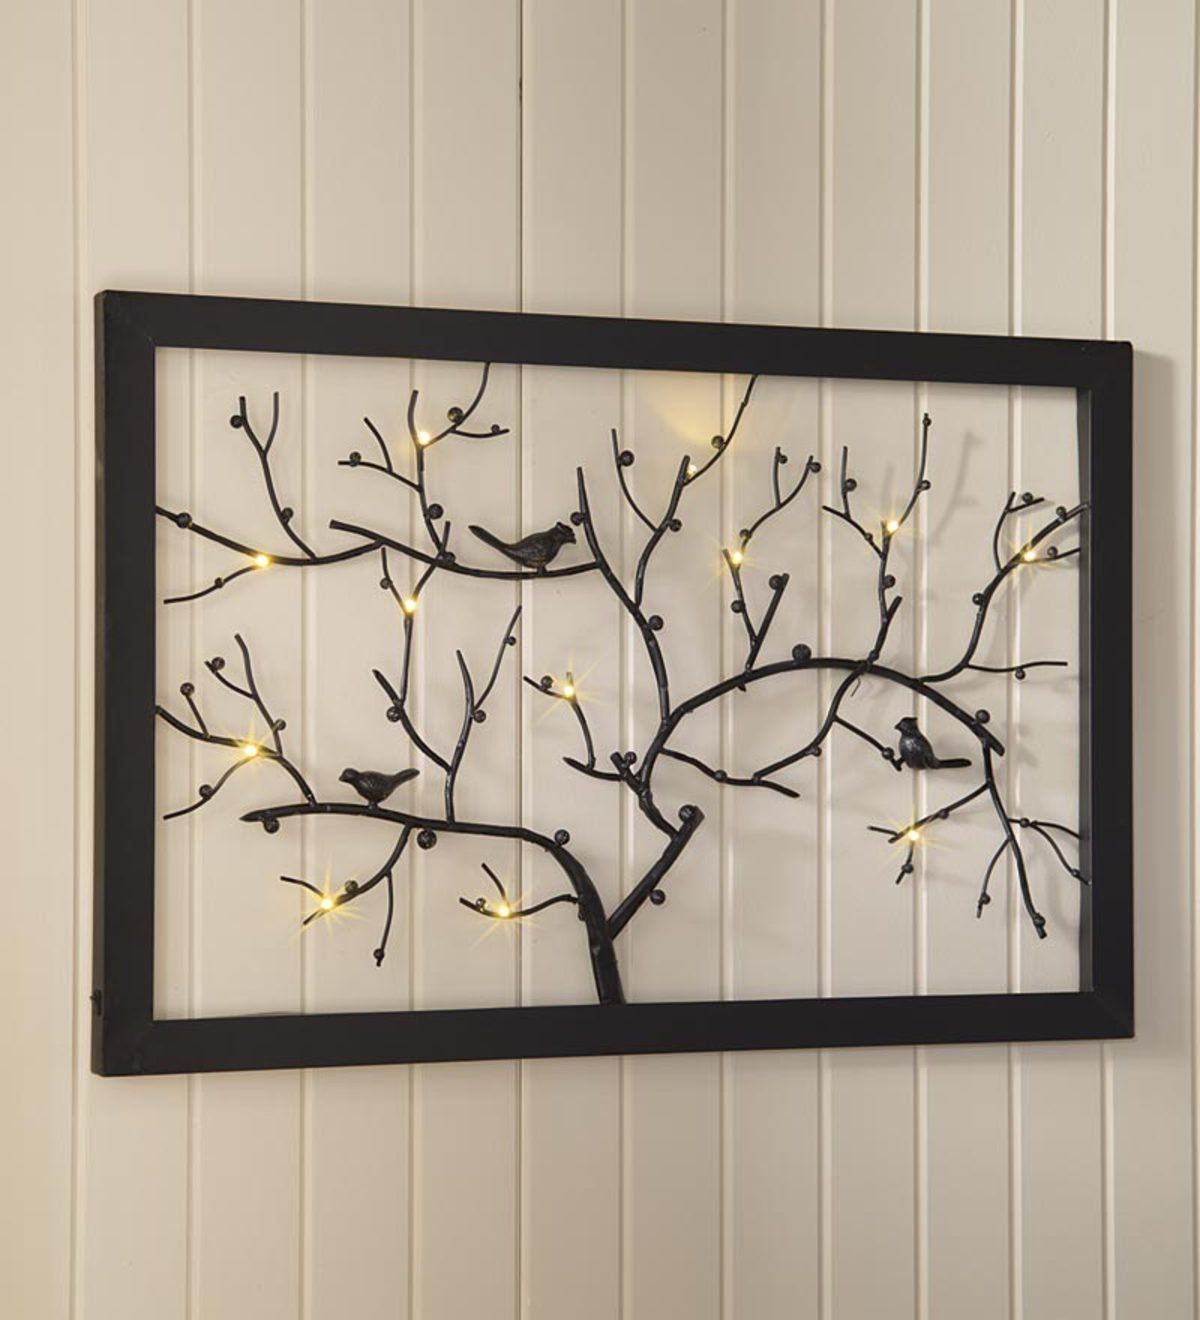 Plowhearth Within Bird On Tree Branch Wall Art (View 10 of 15)